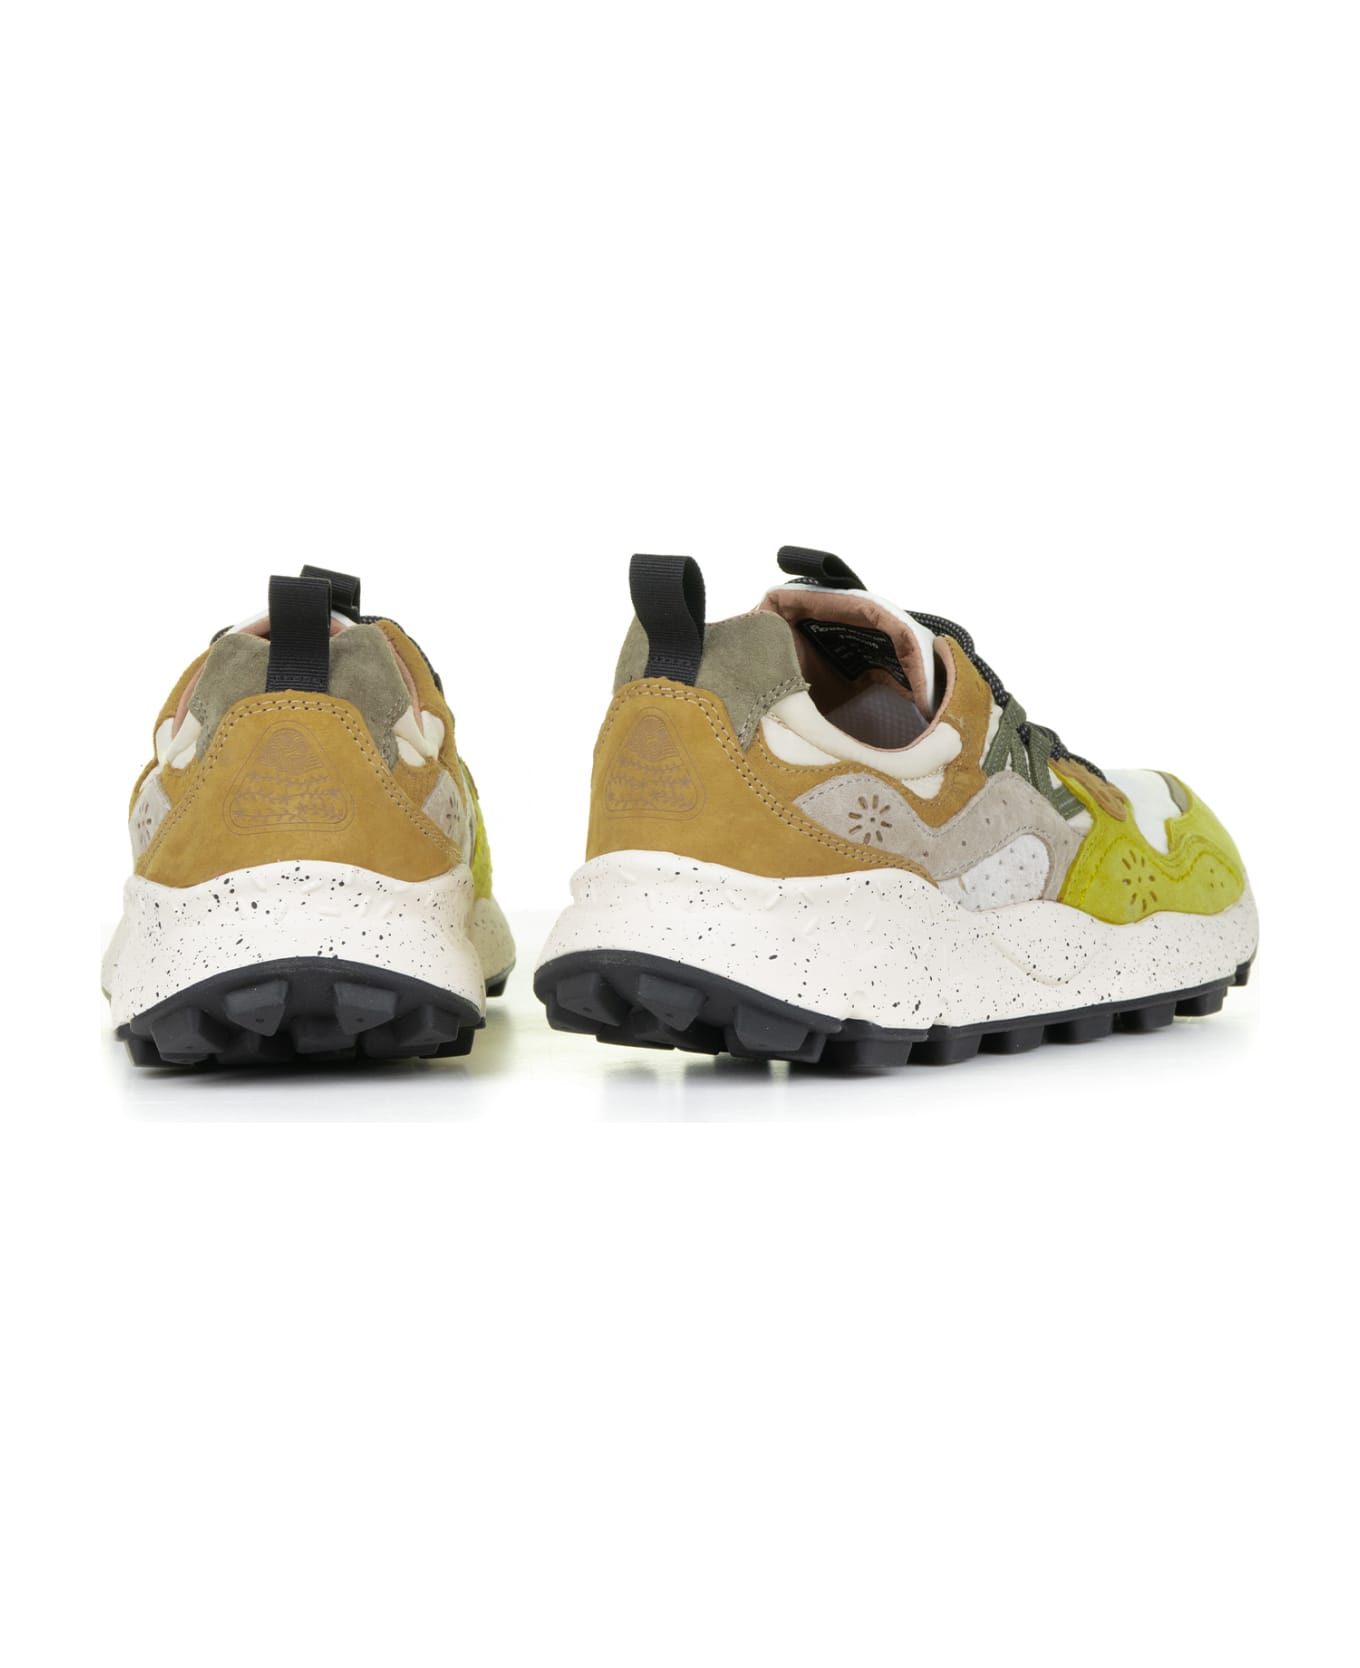 Flower Mountain Yamano Orca Sneakers In Suede And Nylon - OCHER WHITE スニーカー